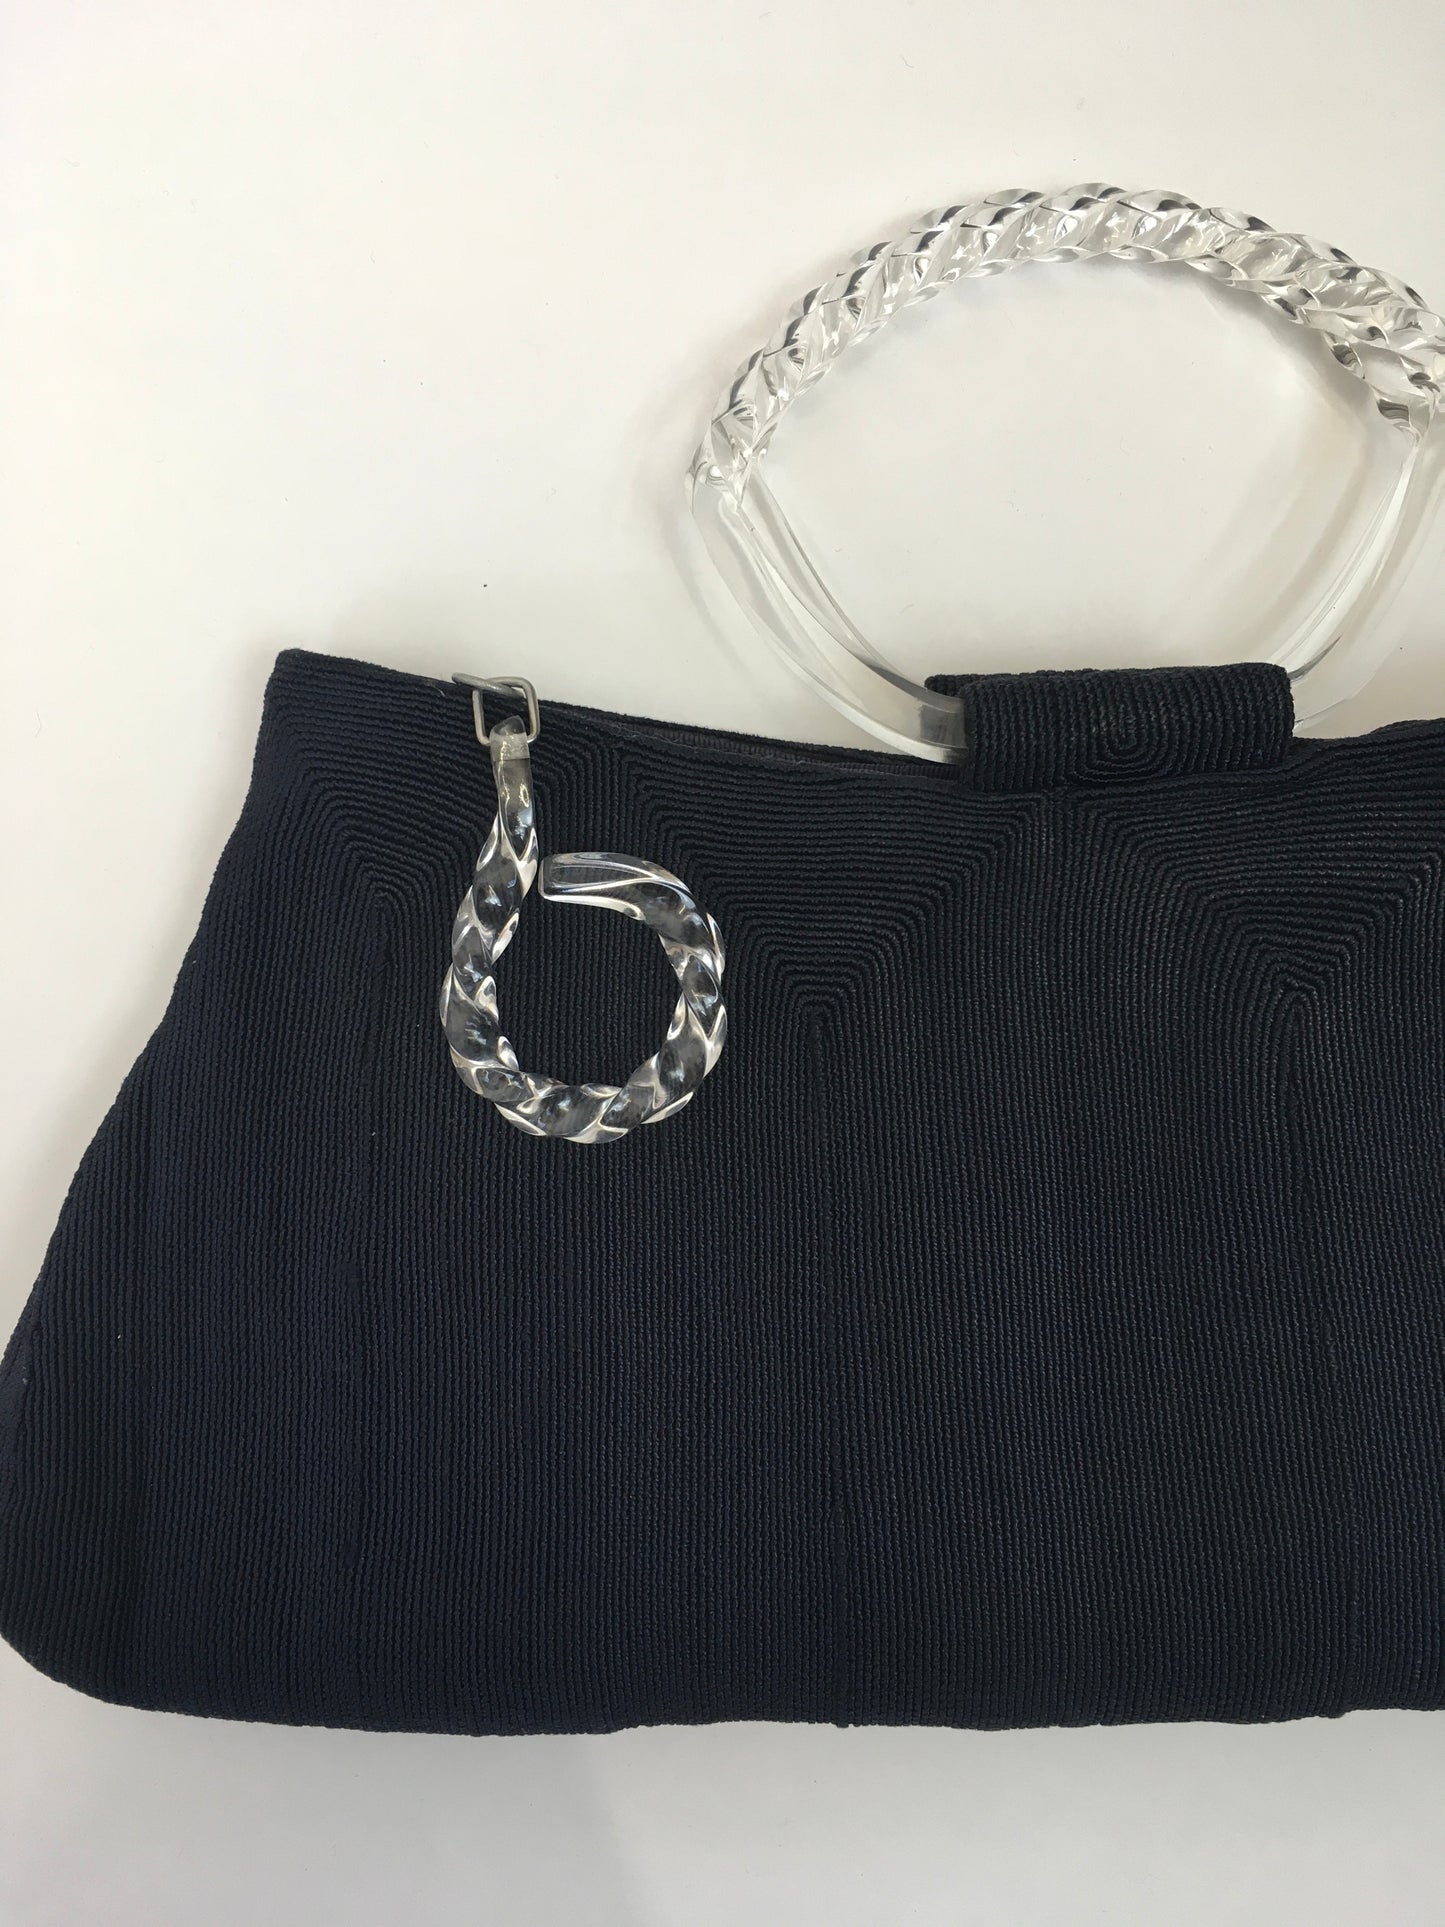 Original 1940’s STUNNING Navy ‘ Corde’ Handbag - With Twisted Lucite Double Handle and Chunky Pull